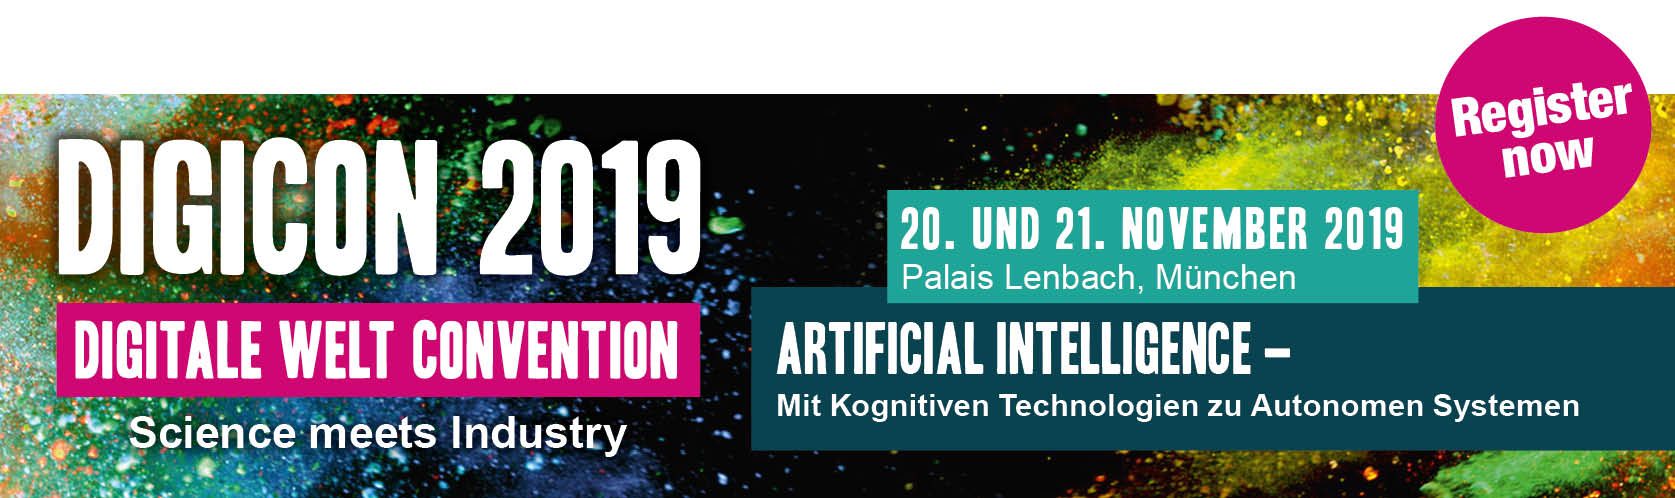 Digicon 2019 - Artificial Intelligence - With Cognitive Technologies to Autonomous Systems